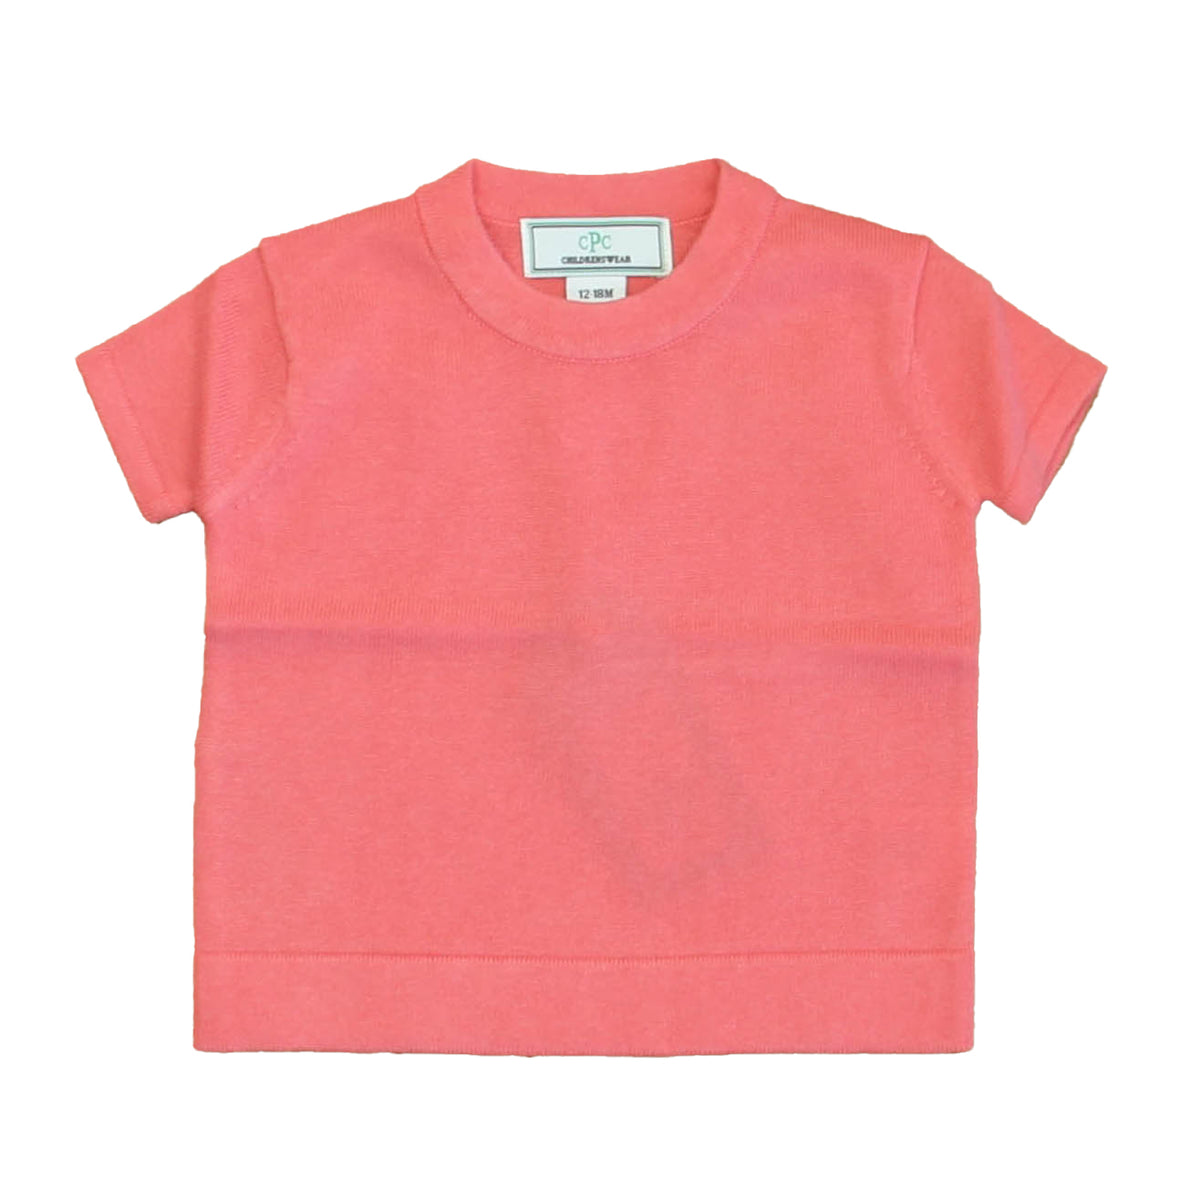 New with Tags: Sunkissed Coral Sweater size: 12 Months -- FINAL SALE